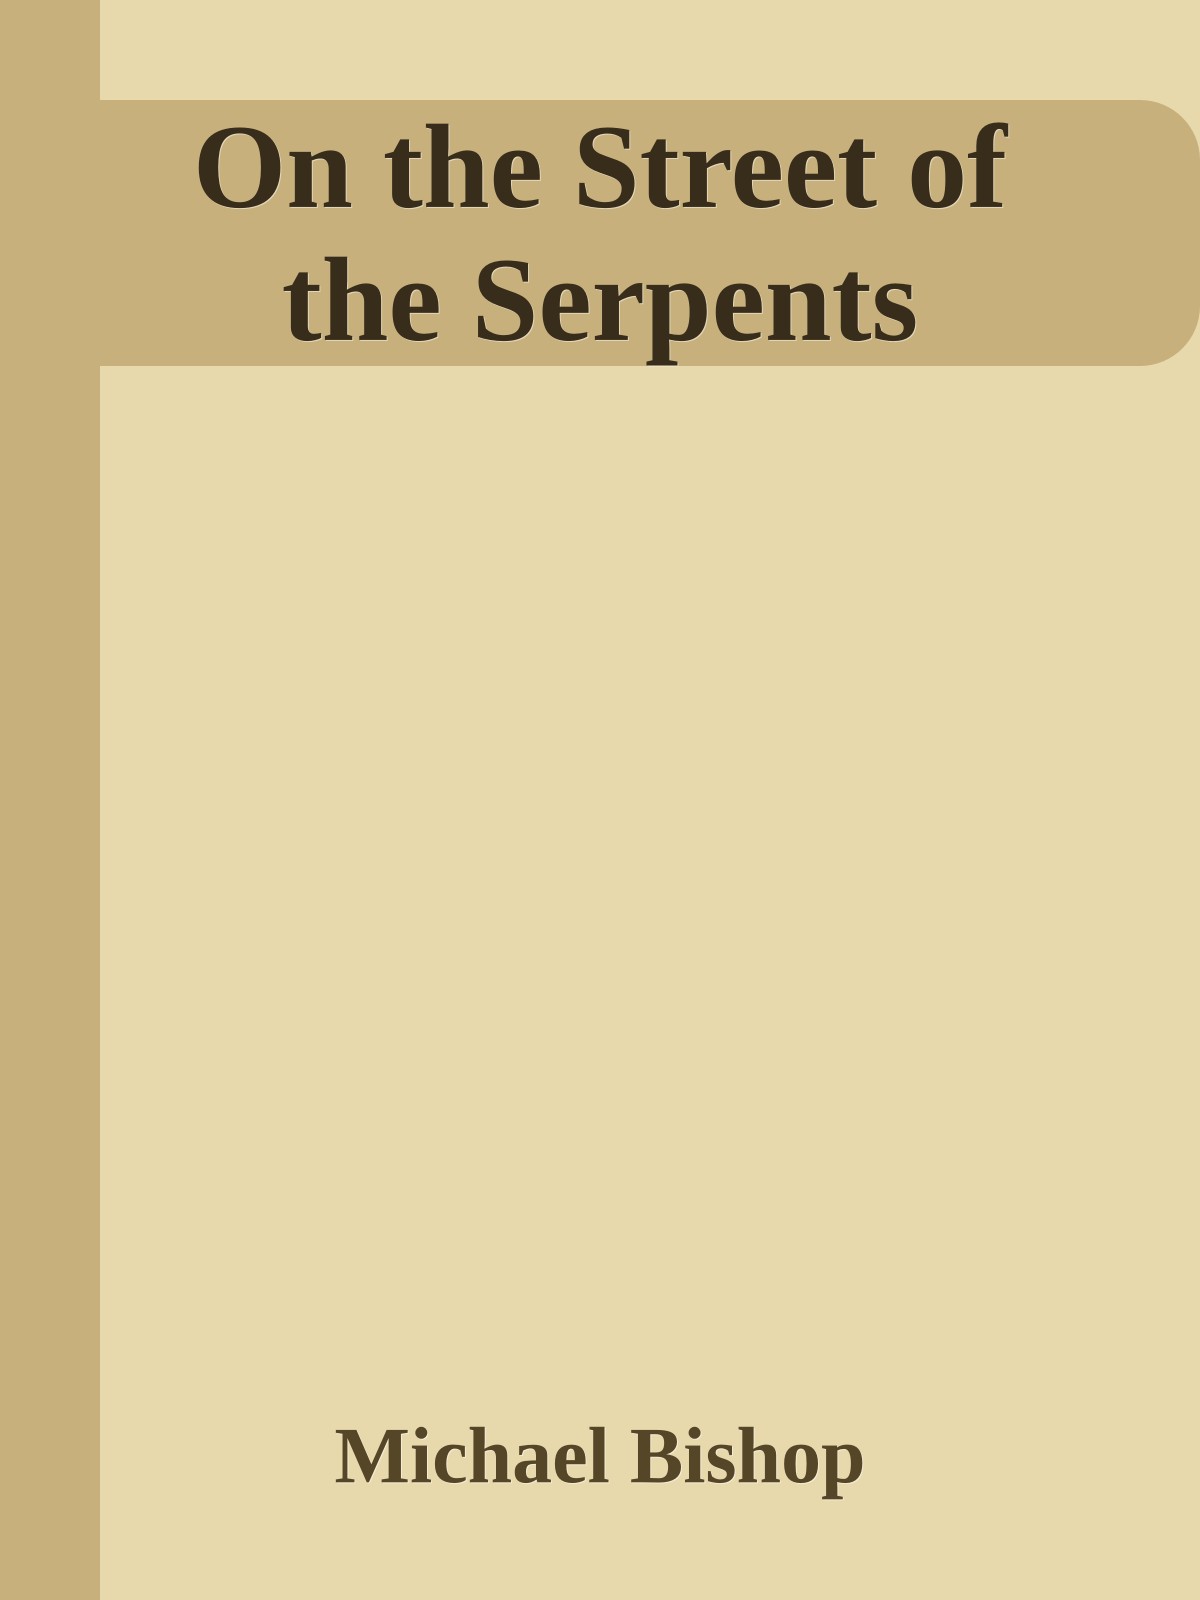 On the Street of the Serpents